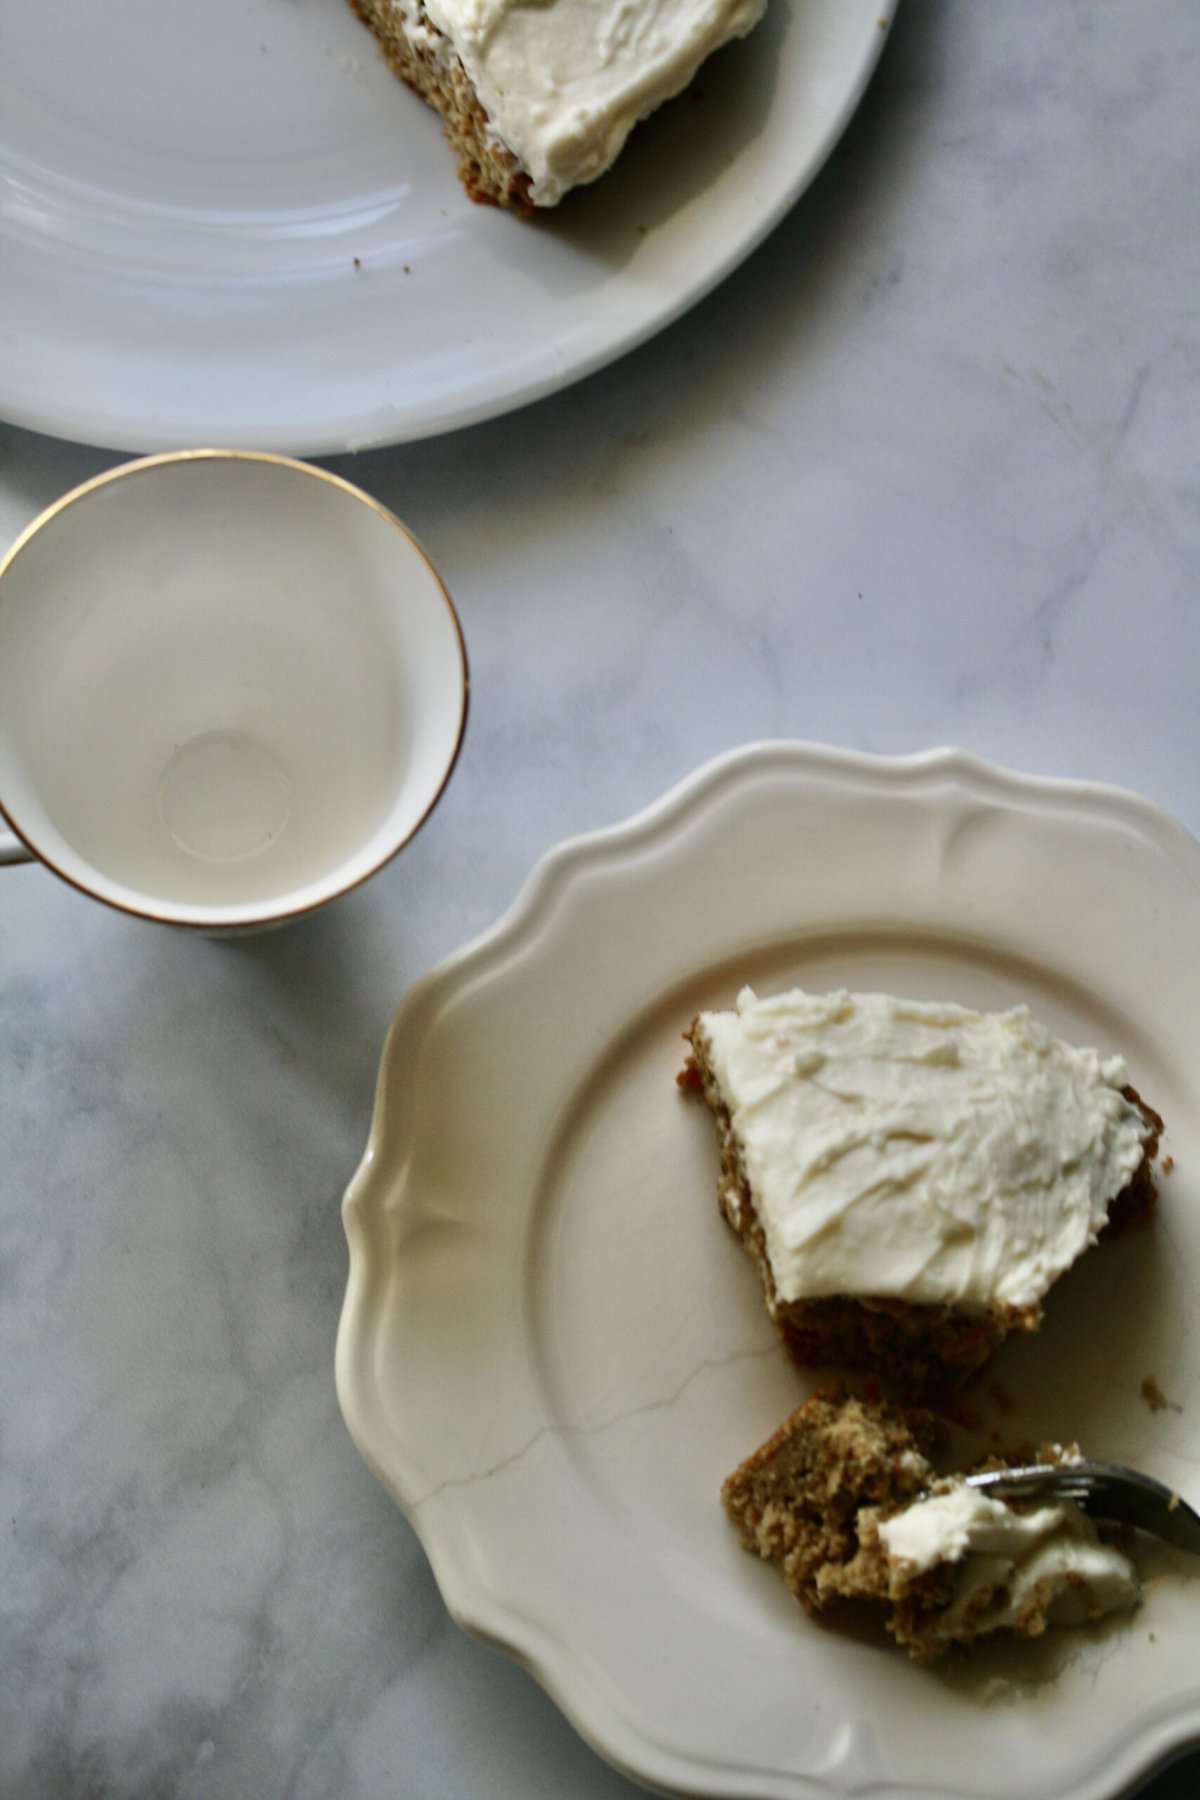 A slice of gluten-free carrot cake on a plate with an empty cup.